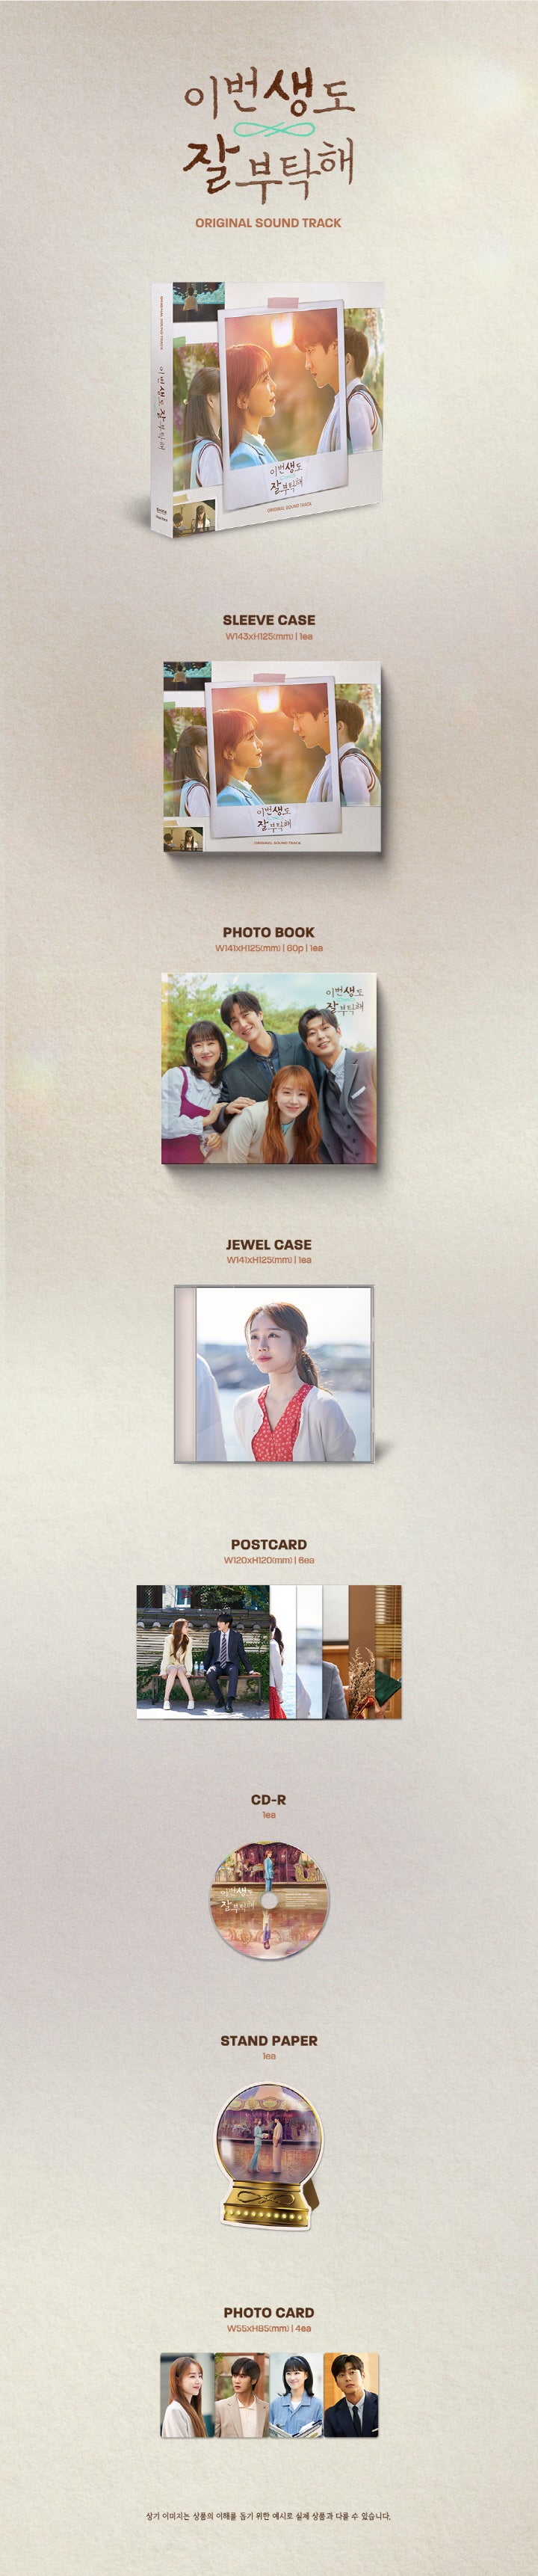 1 CD
1 Photo Book (60 pages)
6 Postcards
1 Stand Paper
4 Photo Cards